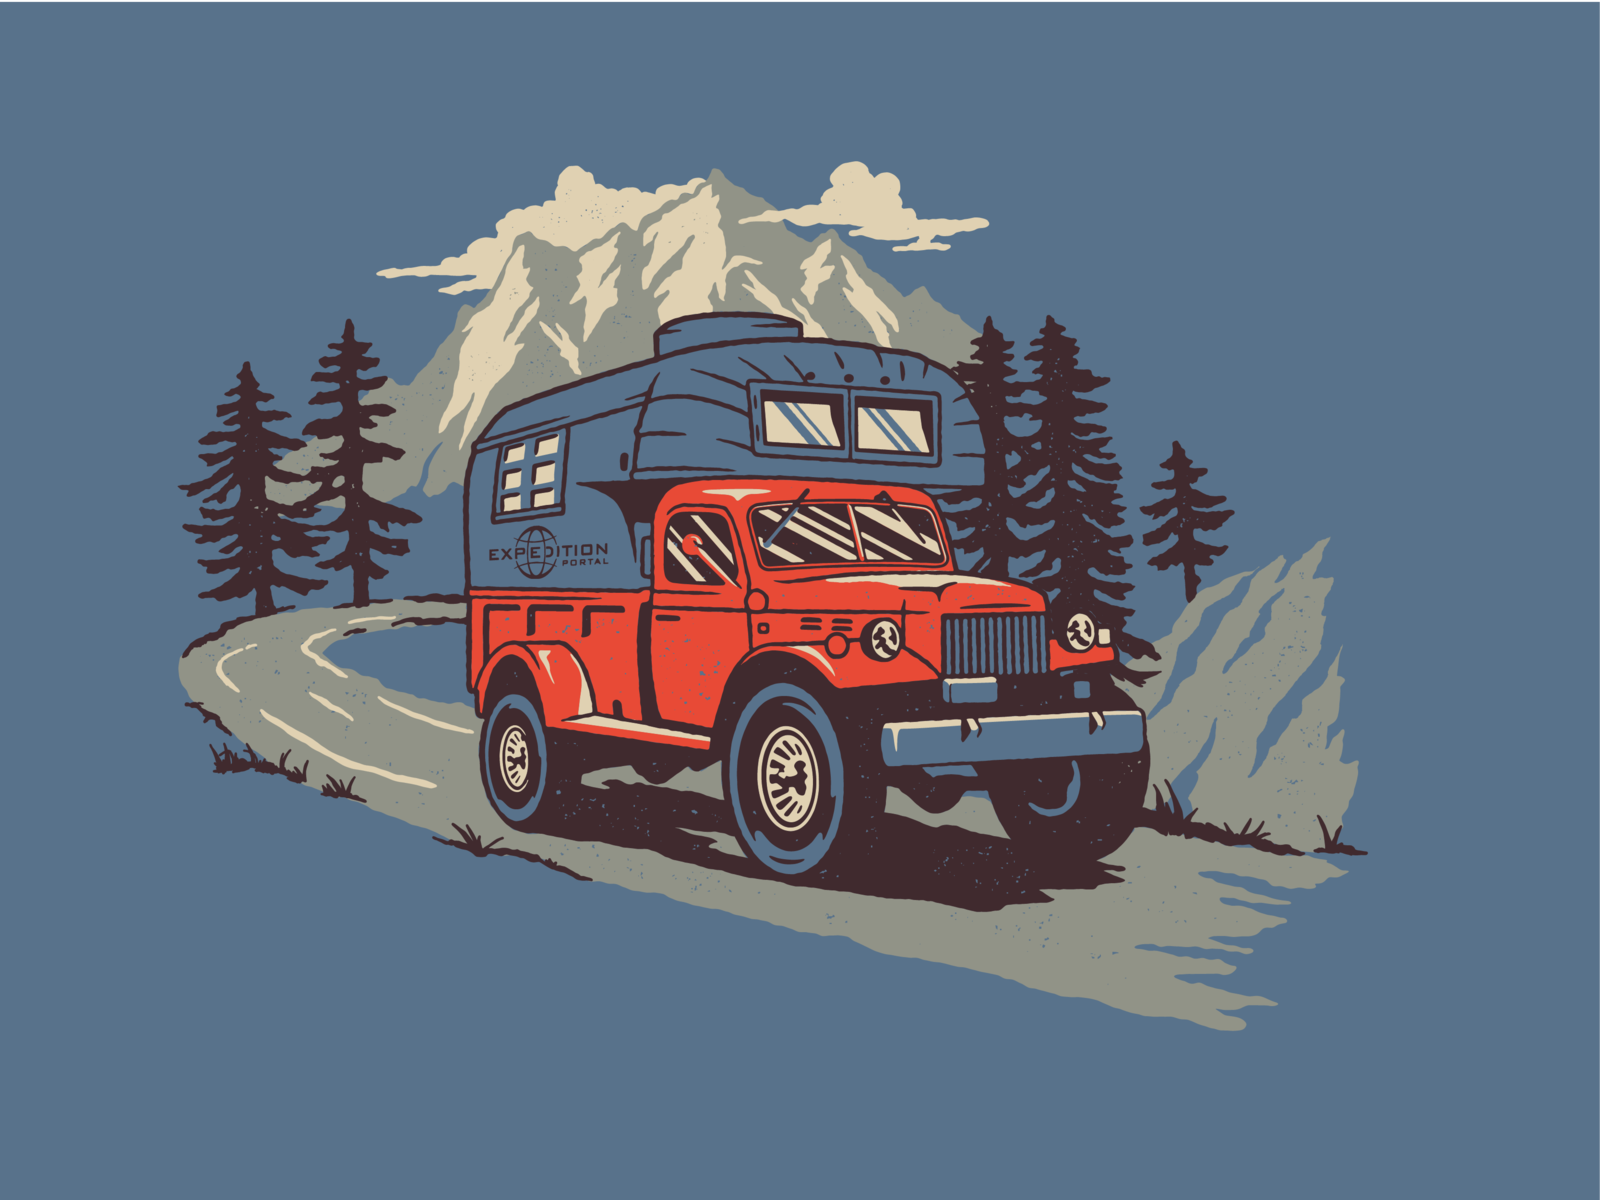 Expedition Portal Shirt by Lauren Griffin on Dribbble